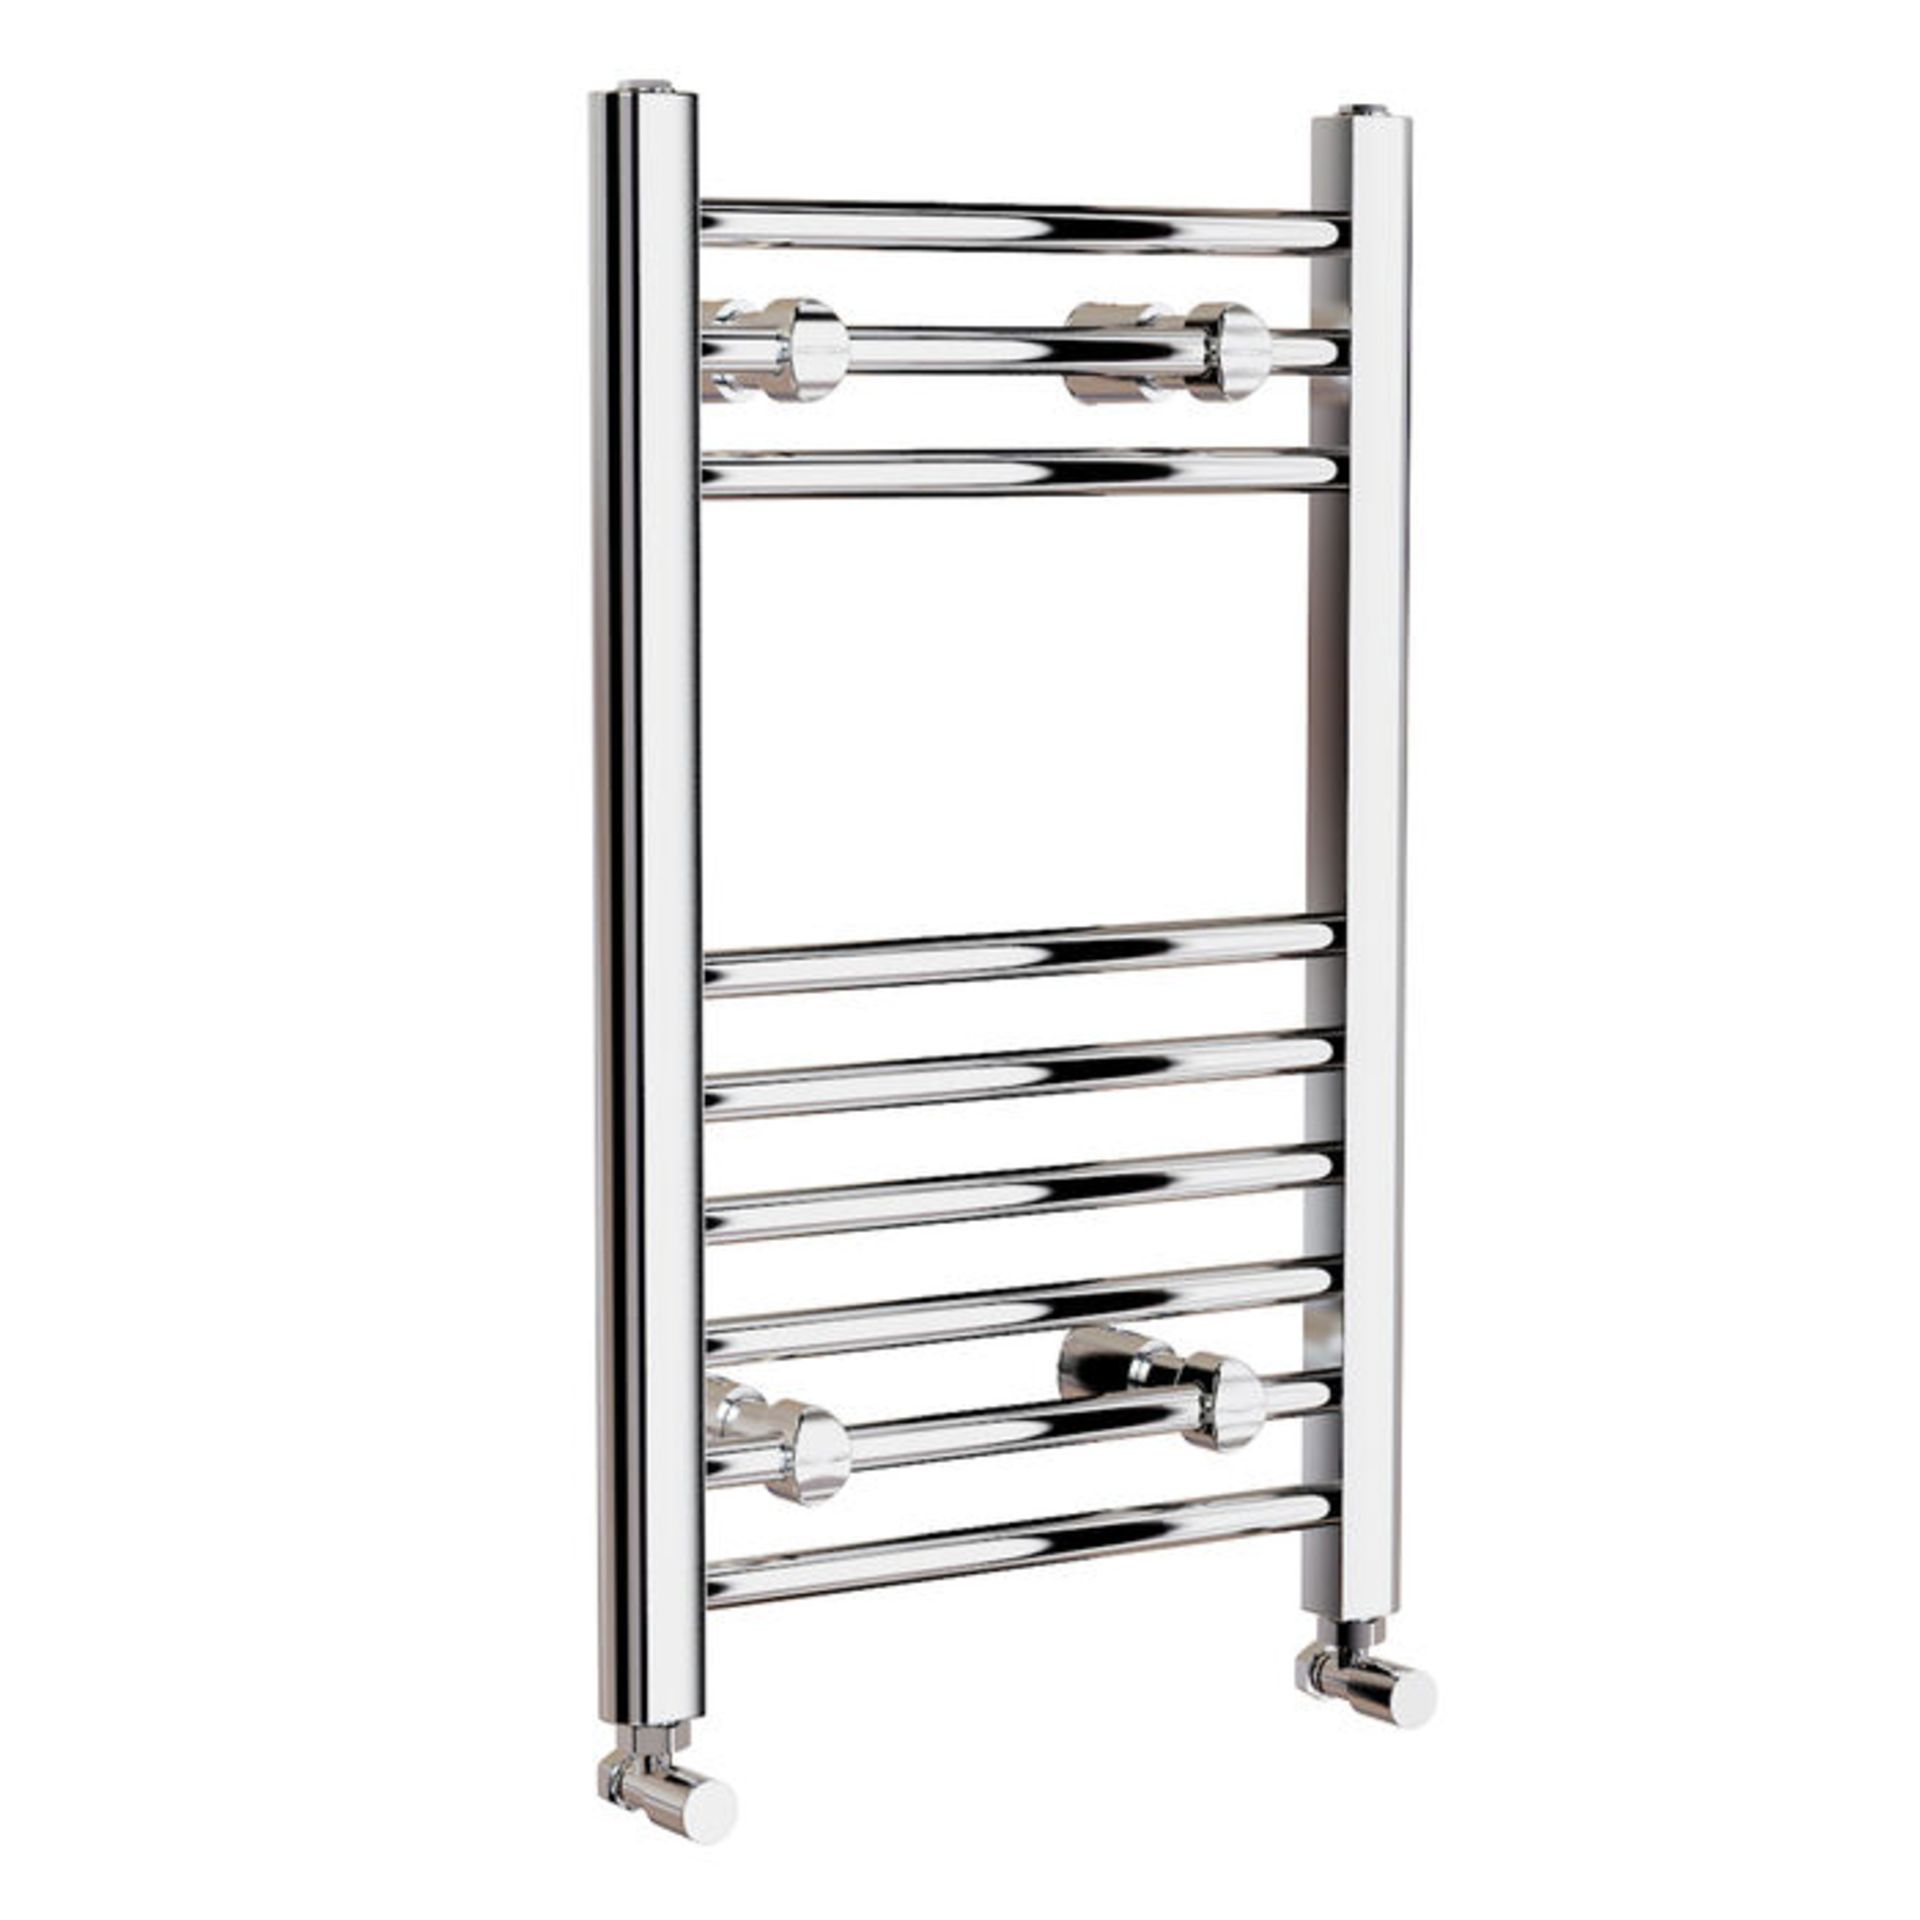 (CC121) 650x400mm Straight Heated Towel Radiator. This chrome towel radiator offers ultimate st... - Image 2 of 3